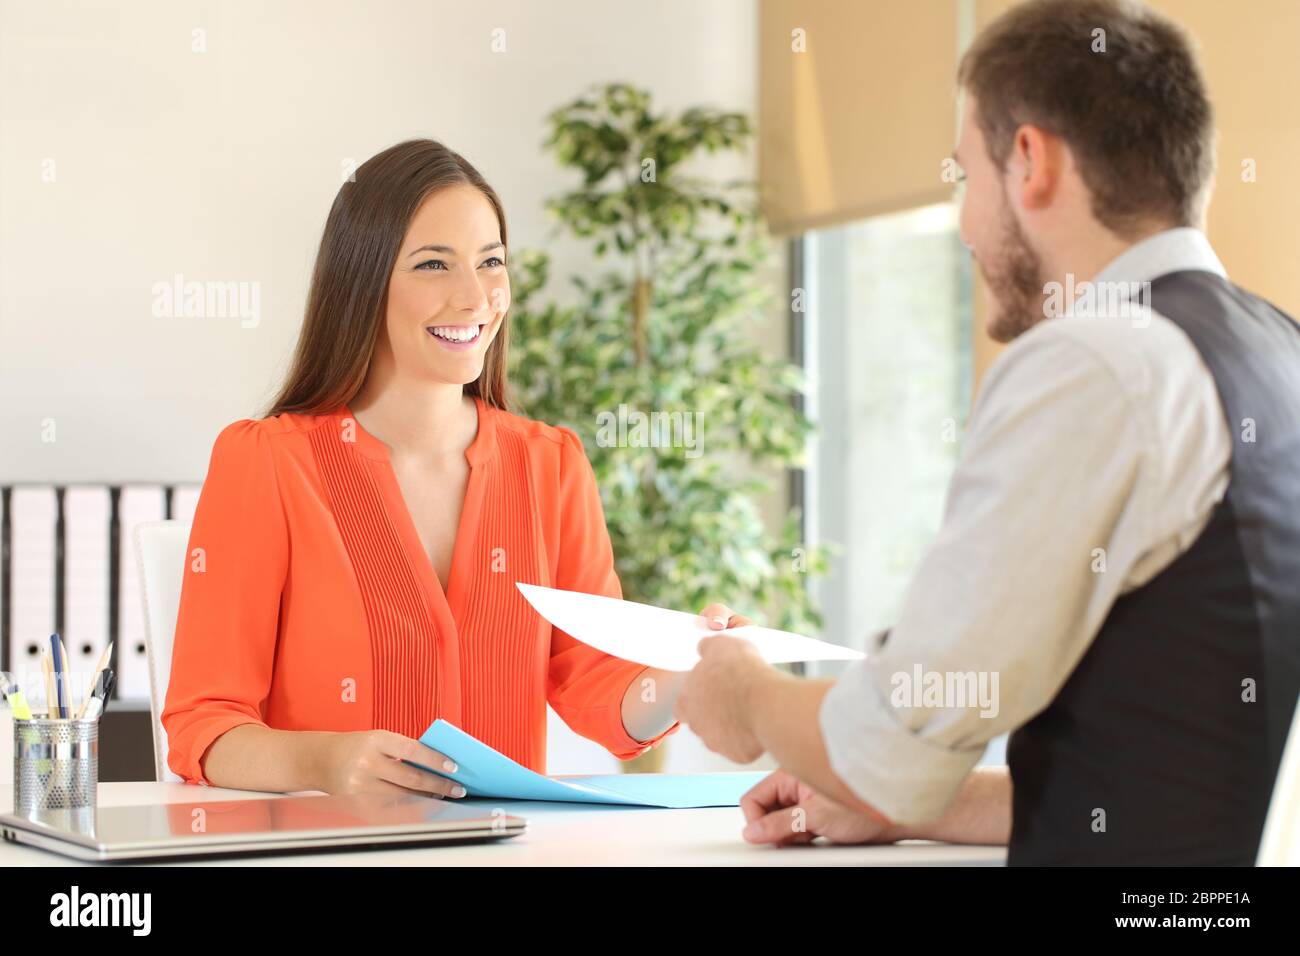 Woman giving a resume to the interviewer in a job interview Stock Photo